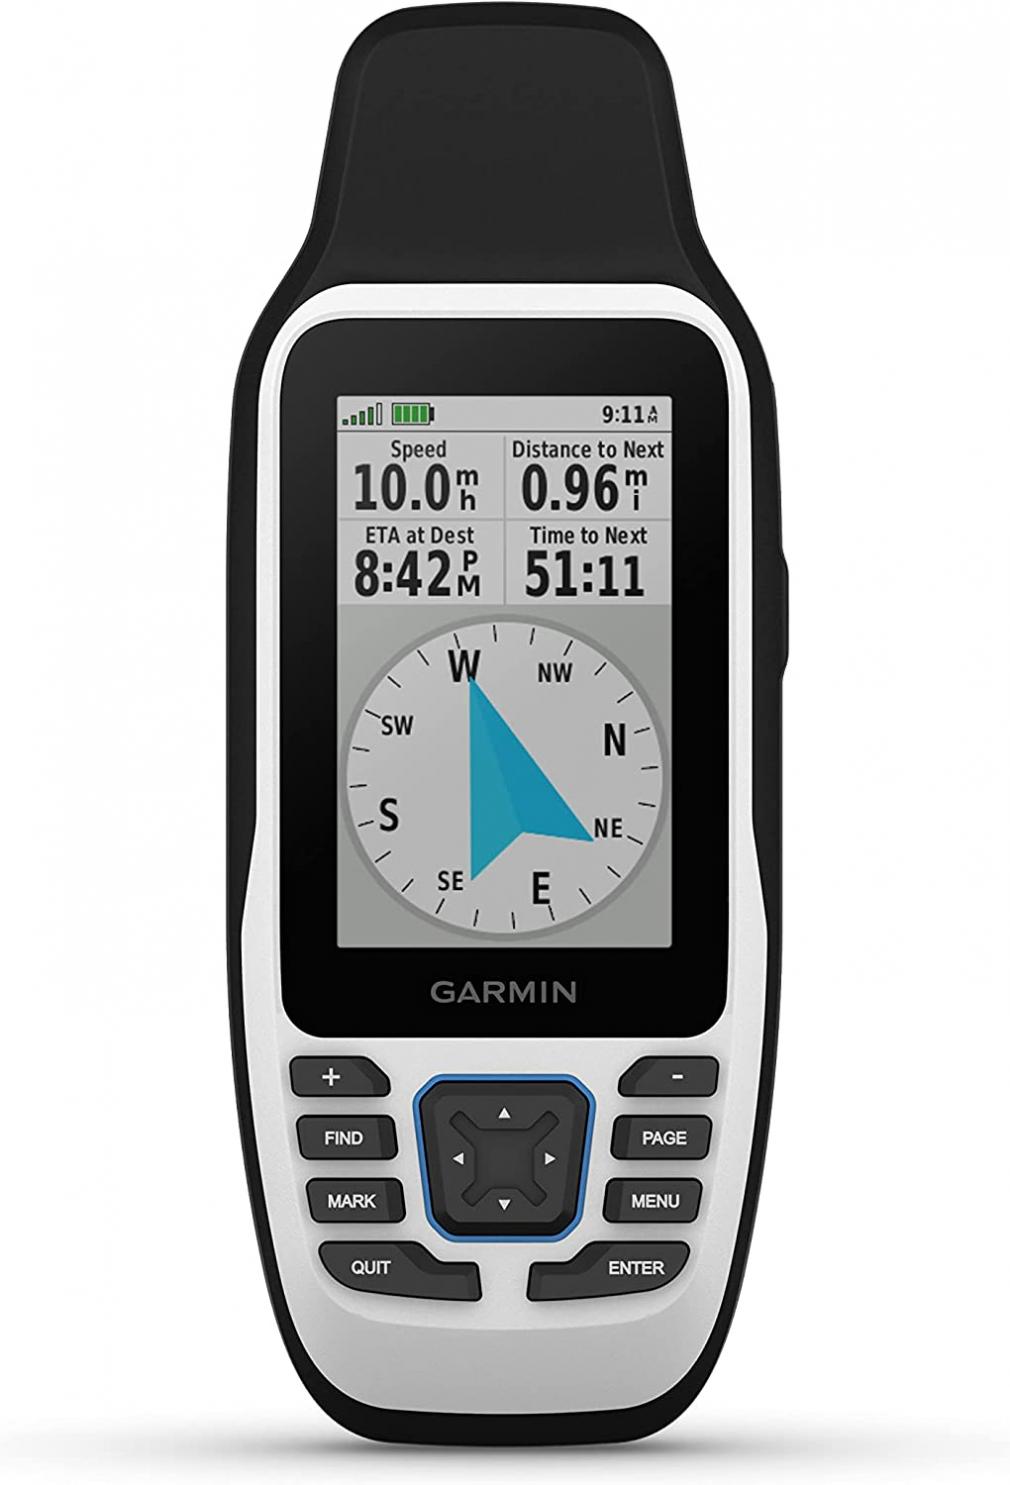 Garmin GPSMAP 79s, Marine GPS Handheld with Worldwide Basemap, Rugged Design and Floats in Water